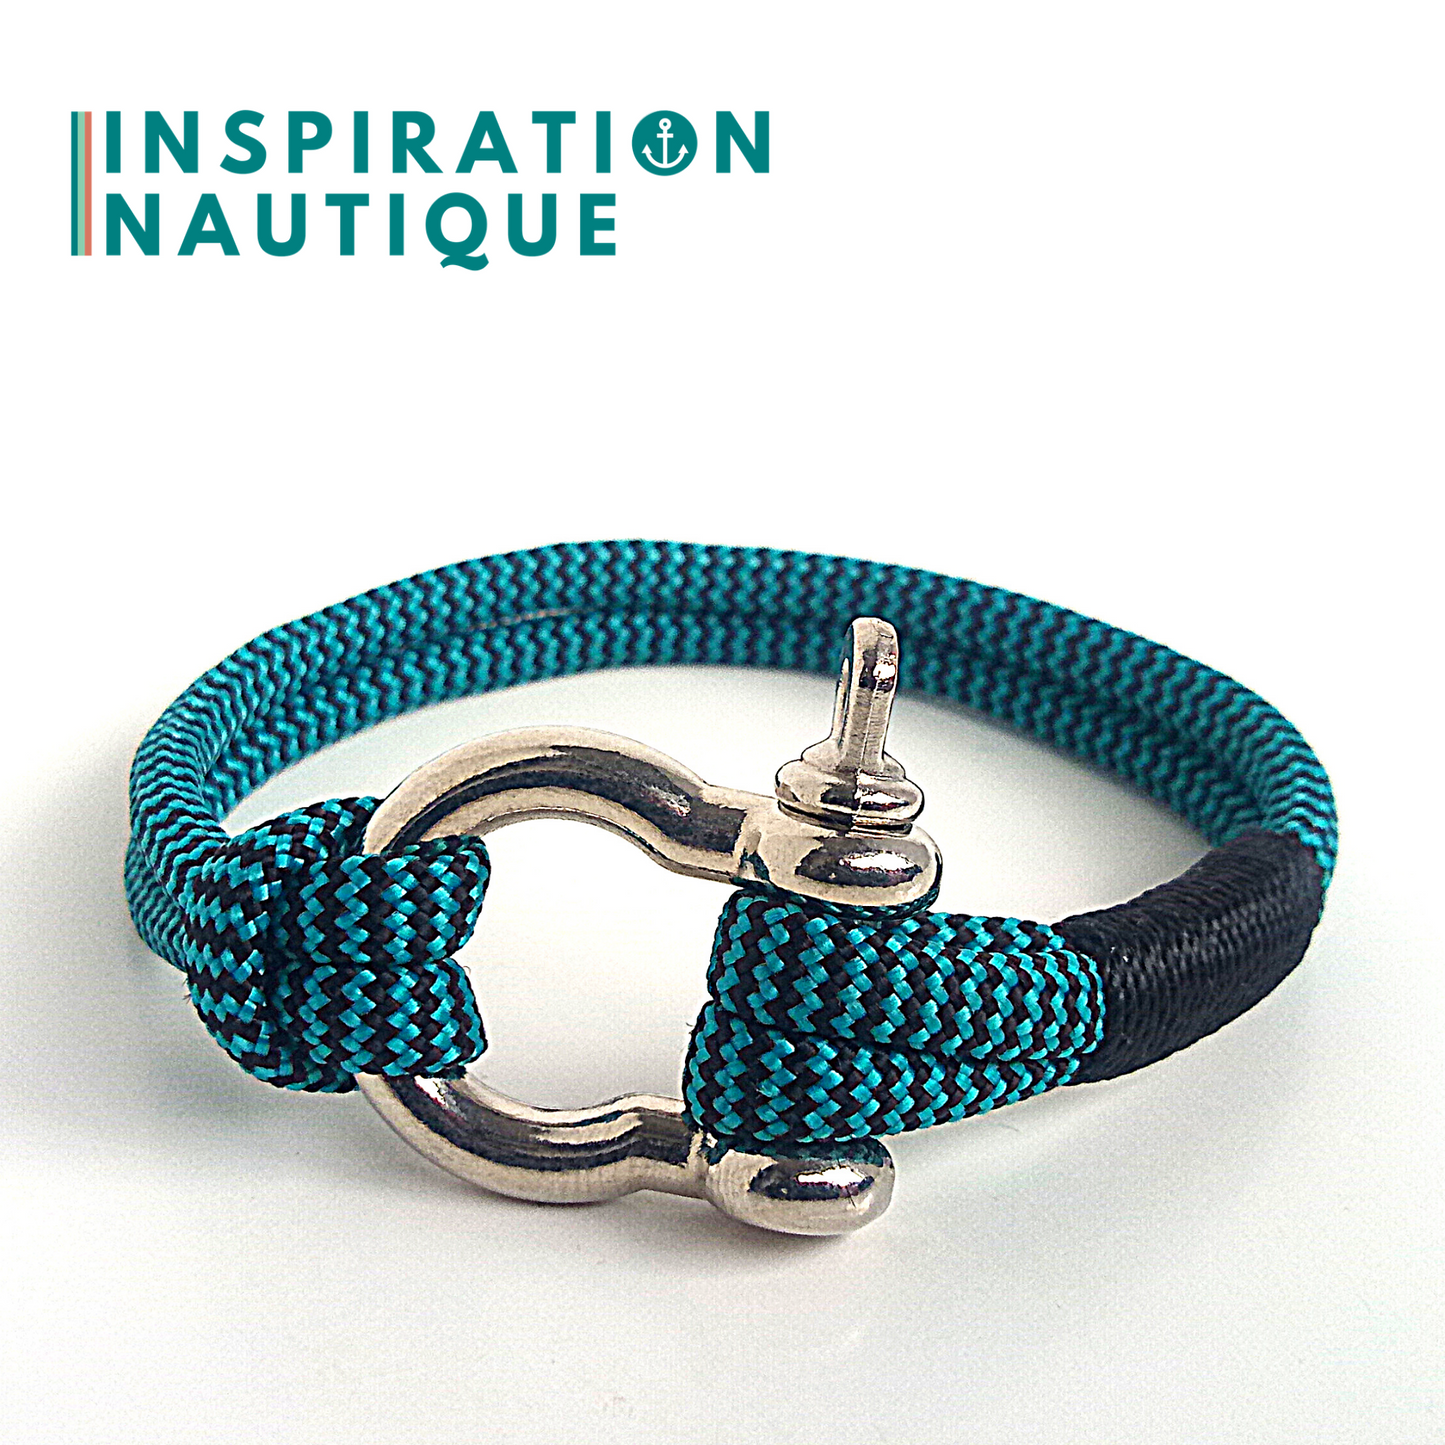 Ready to go | Marine bracelet with shackle for men or women in 550 paracord and stainless steel, Turquoise and black, zigzags, Black whipping, Medium-Large